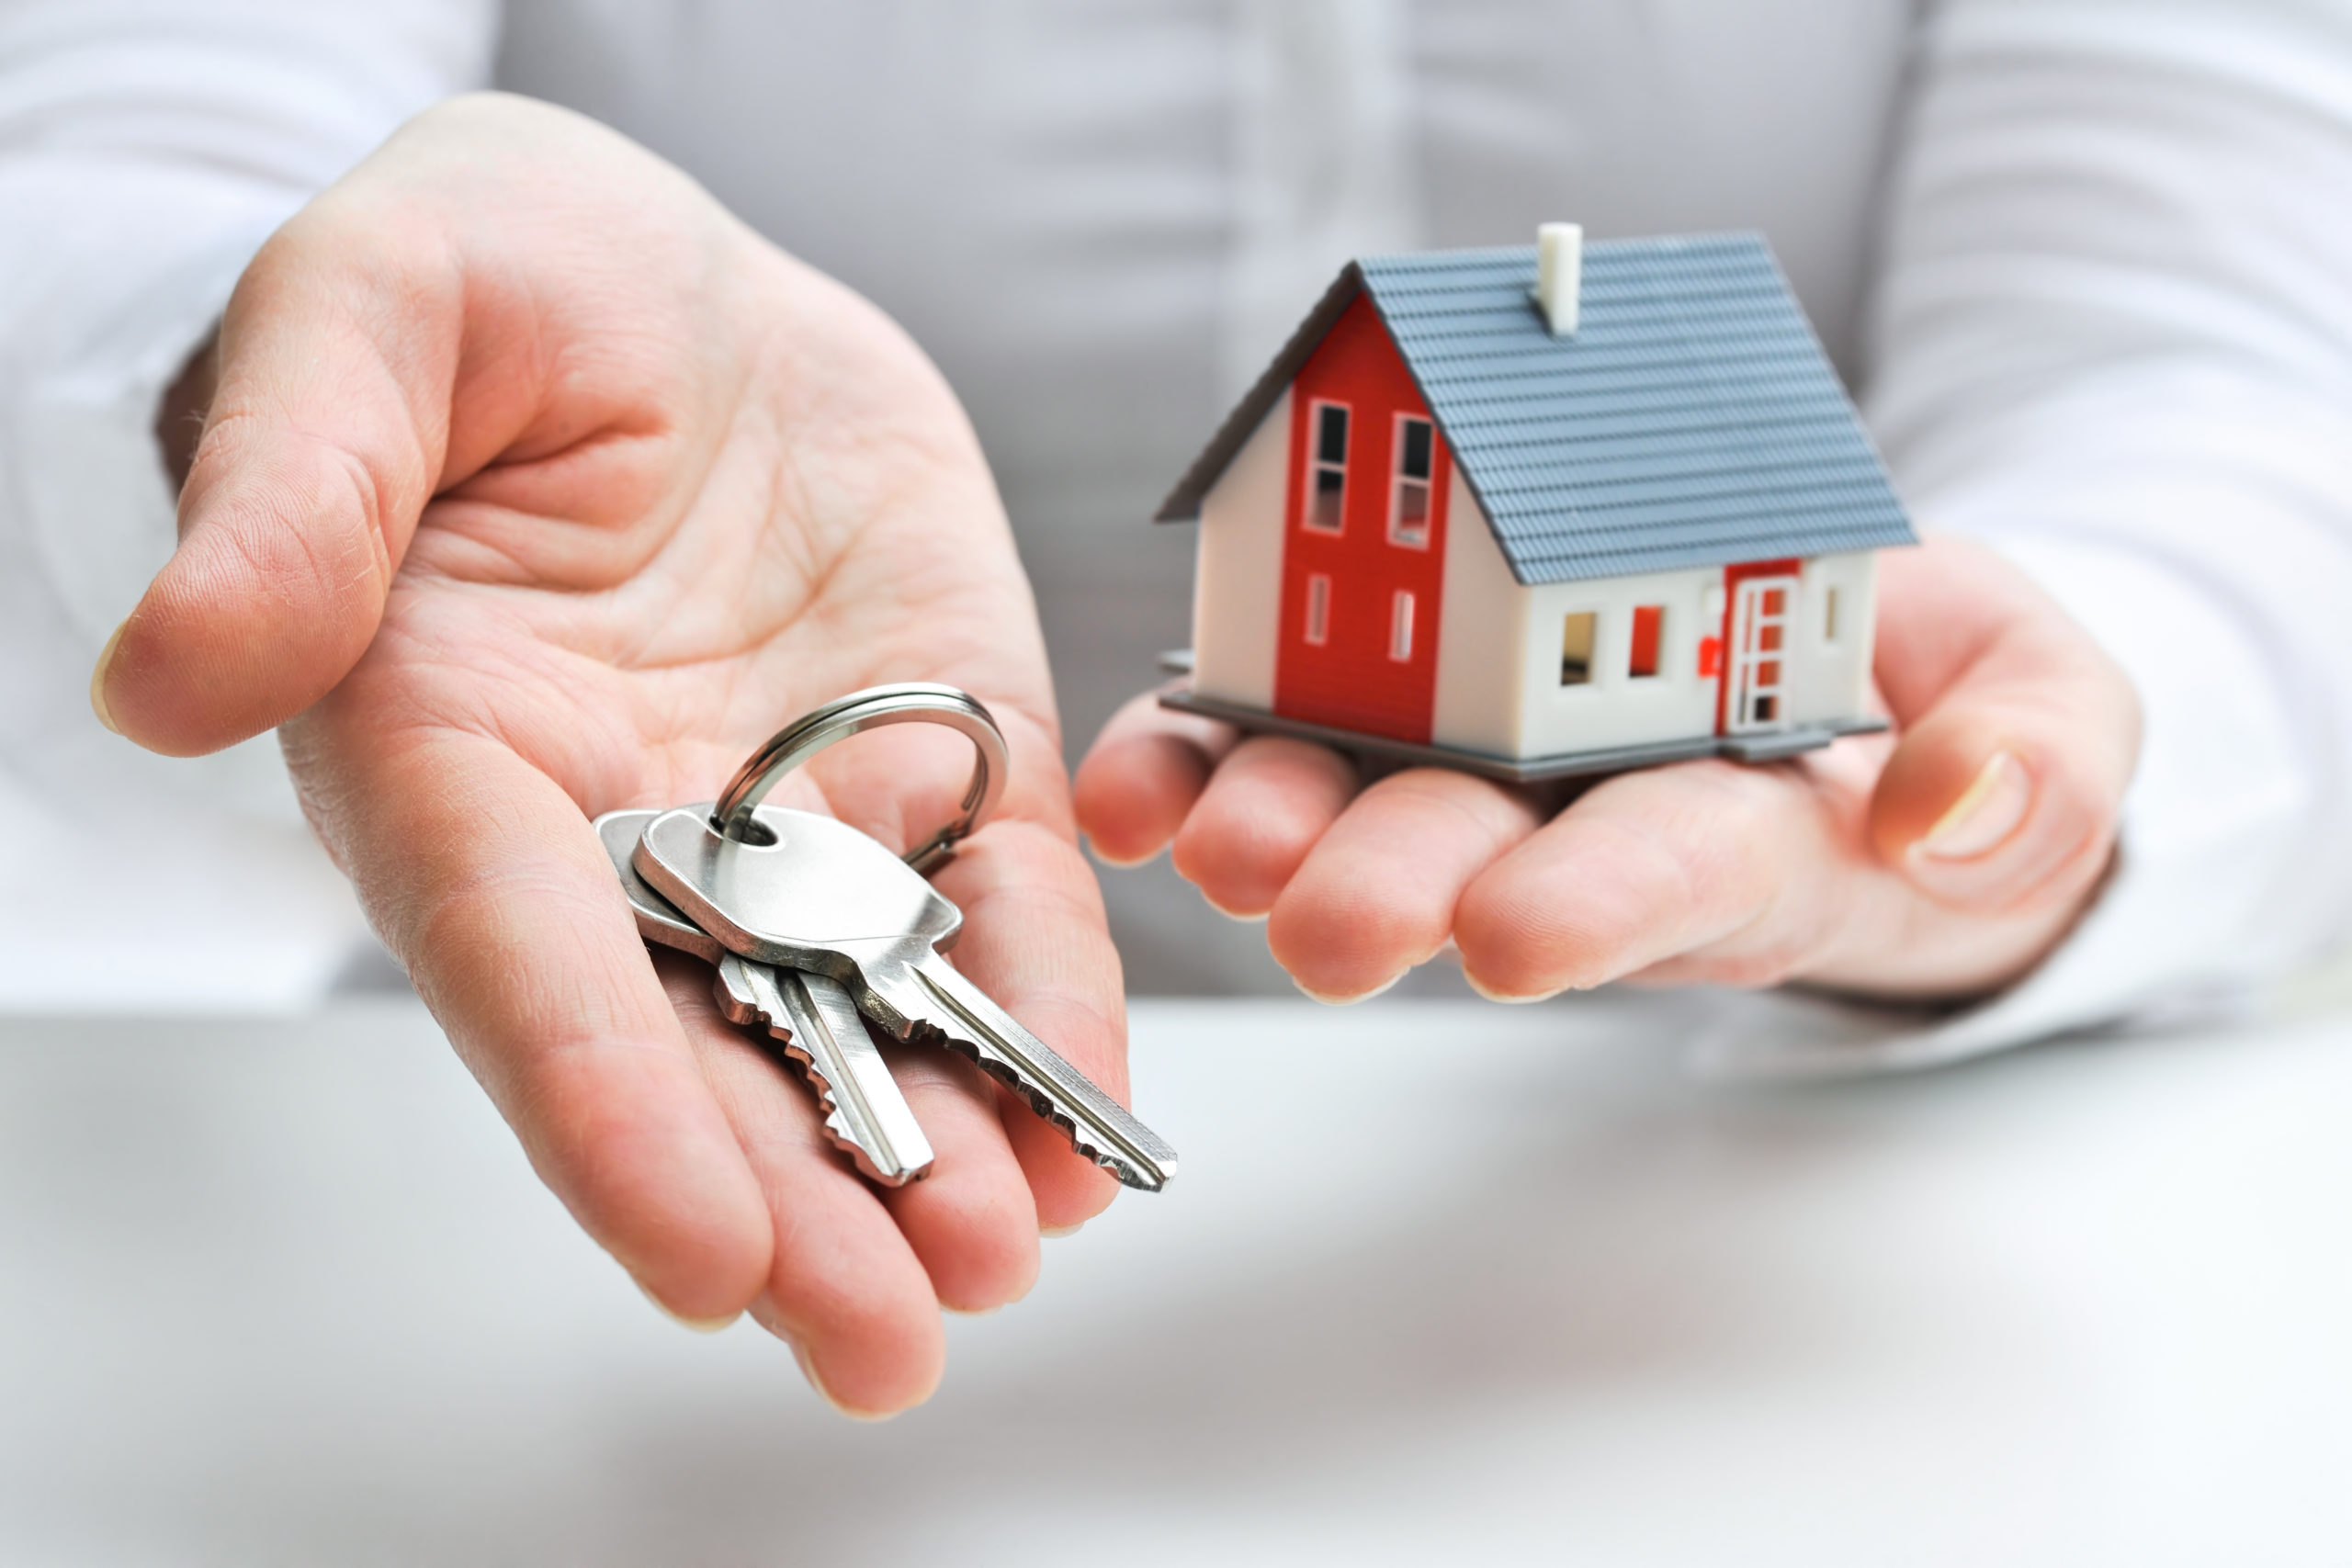 small home and key in the hands